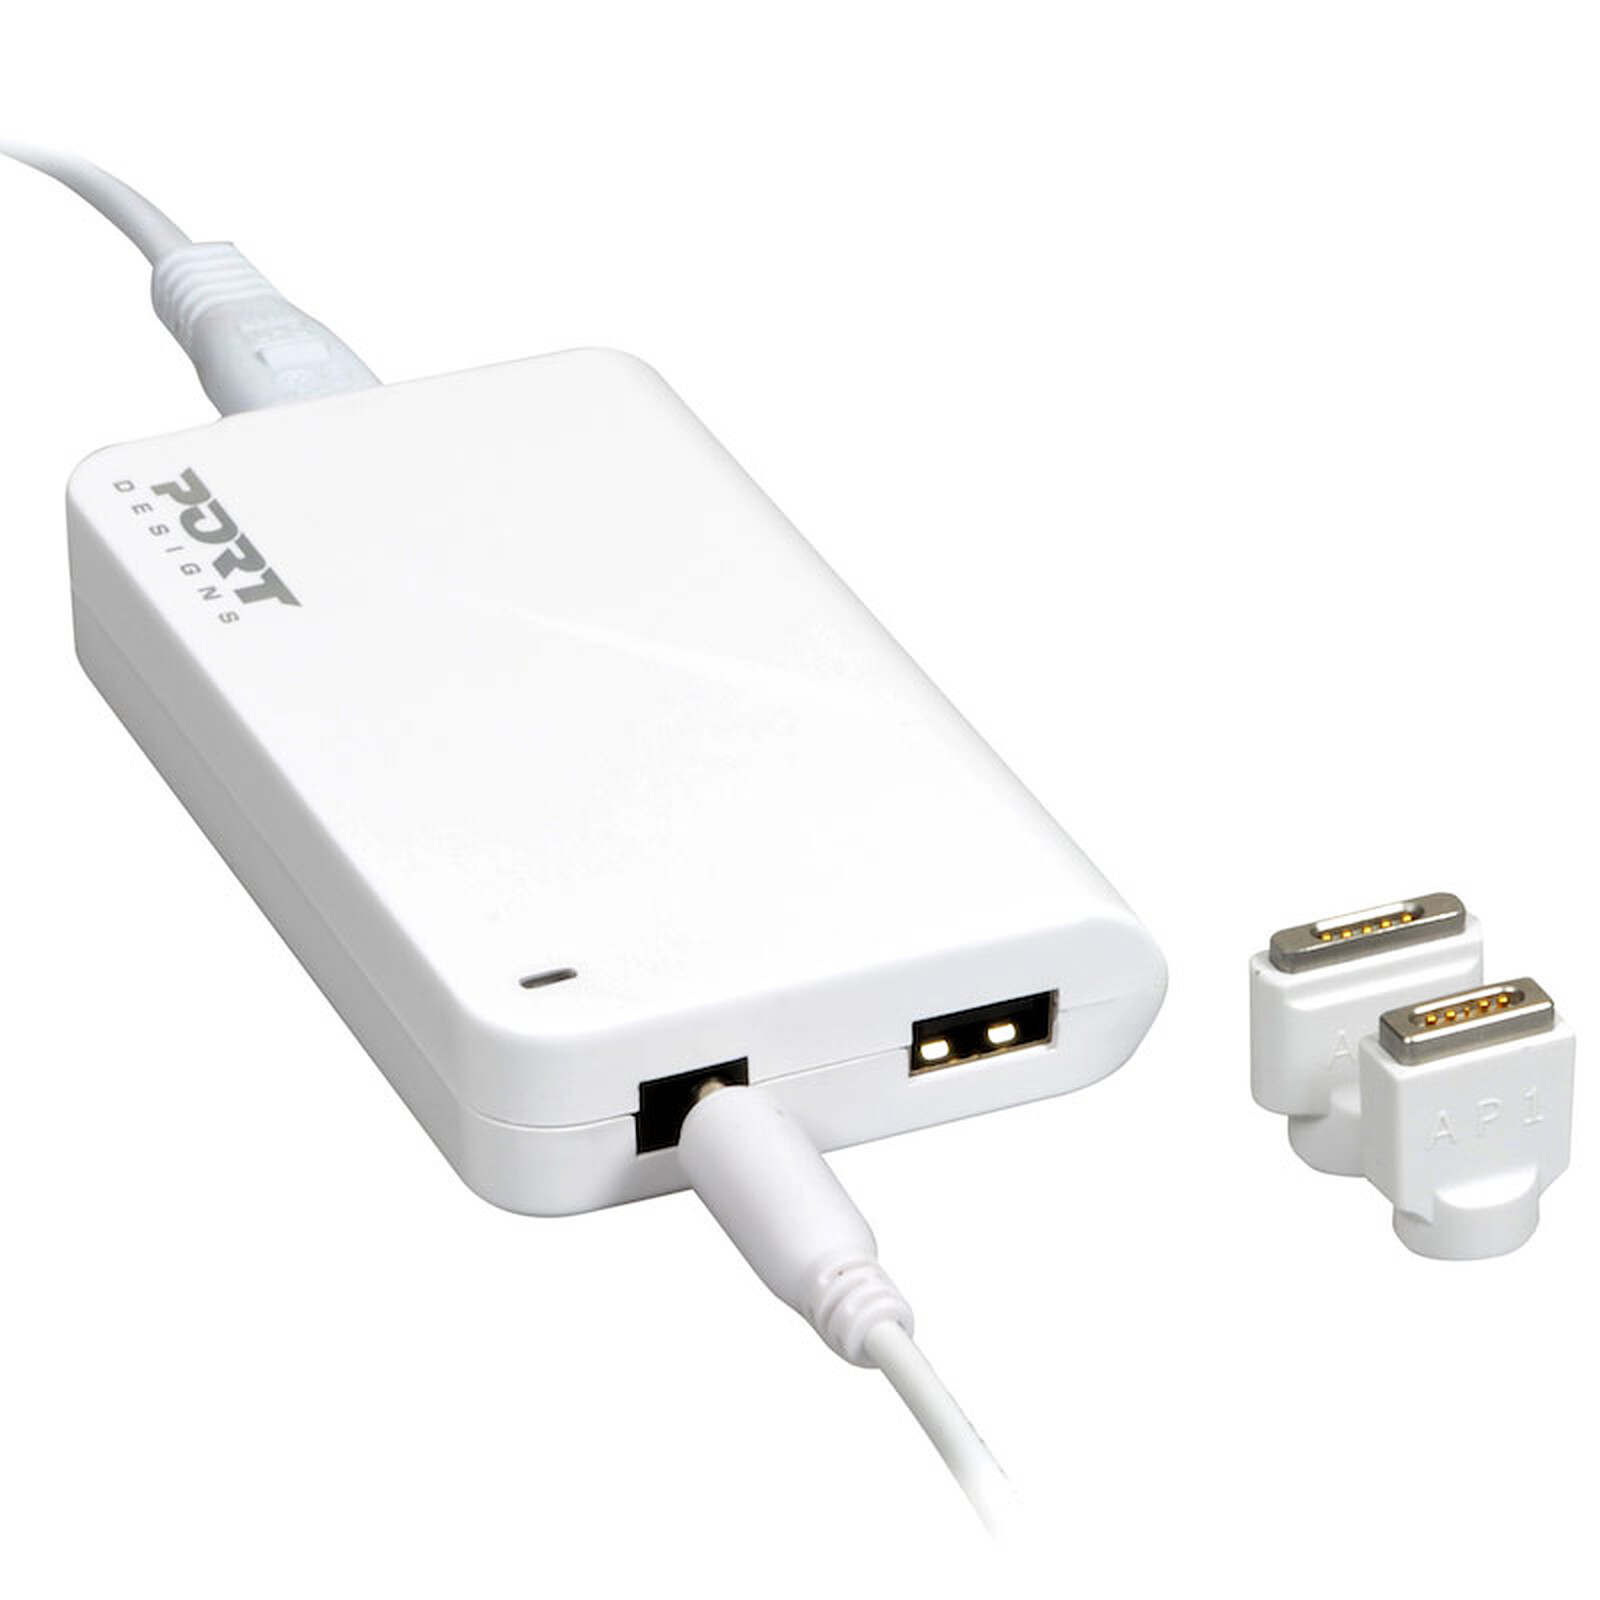 Port Connect MacBook Power Supply (60W) - Apple accessories Port Connect on  LDLC